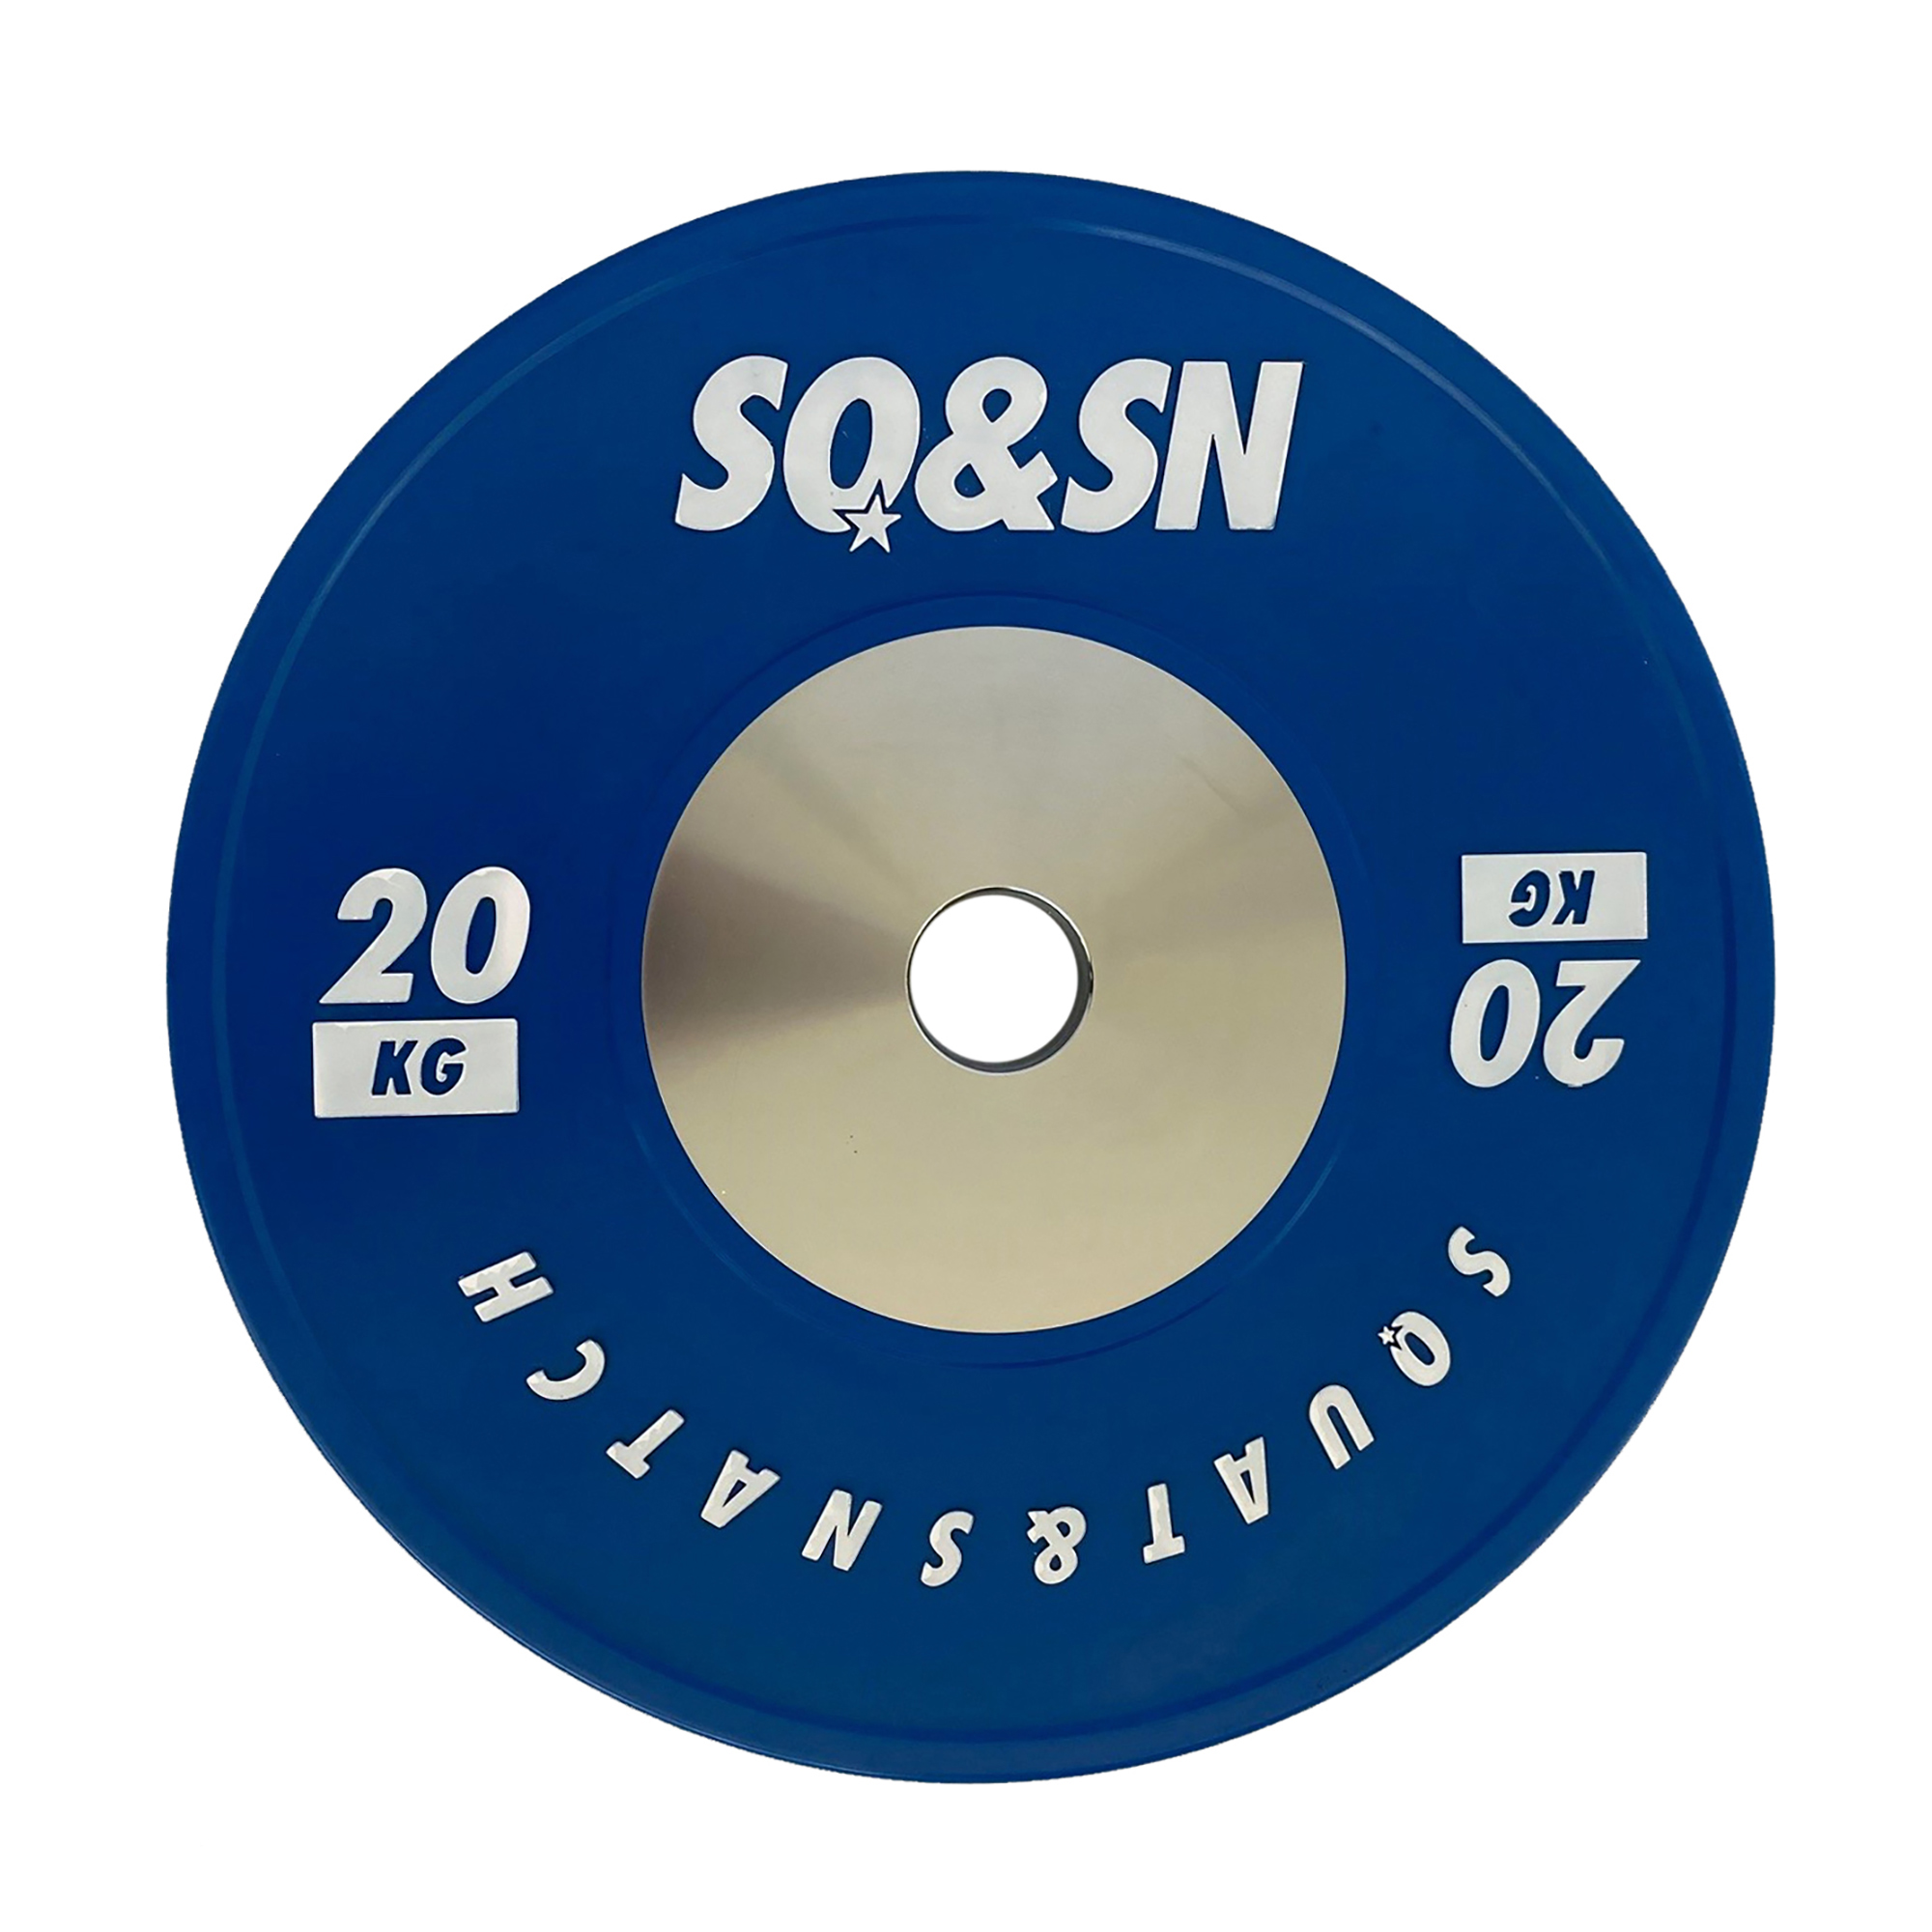 SQ&amp;SN Competition Bumper Plate 20 kg Blue